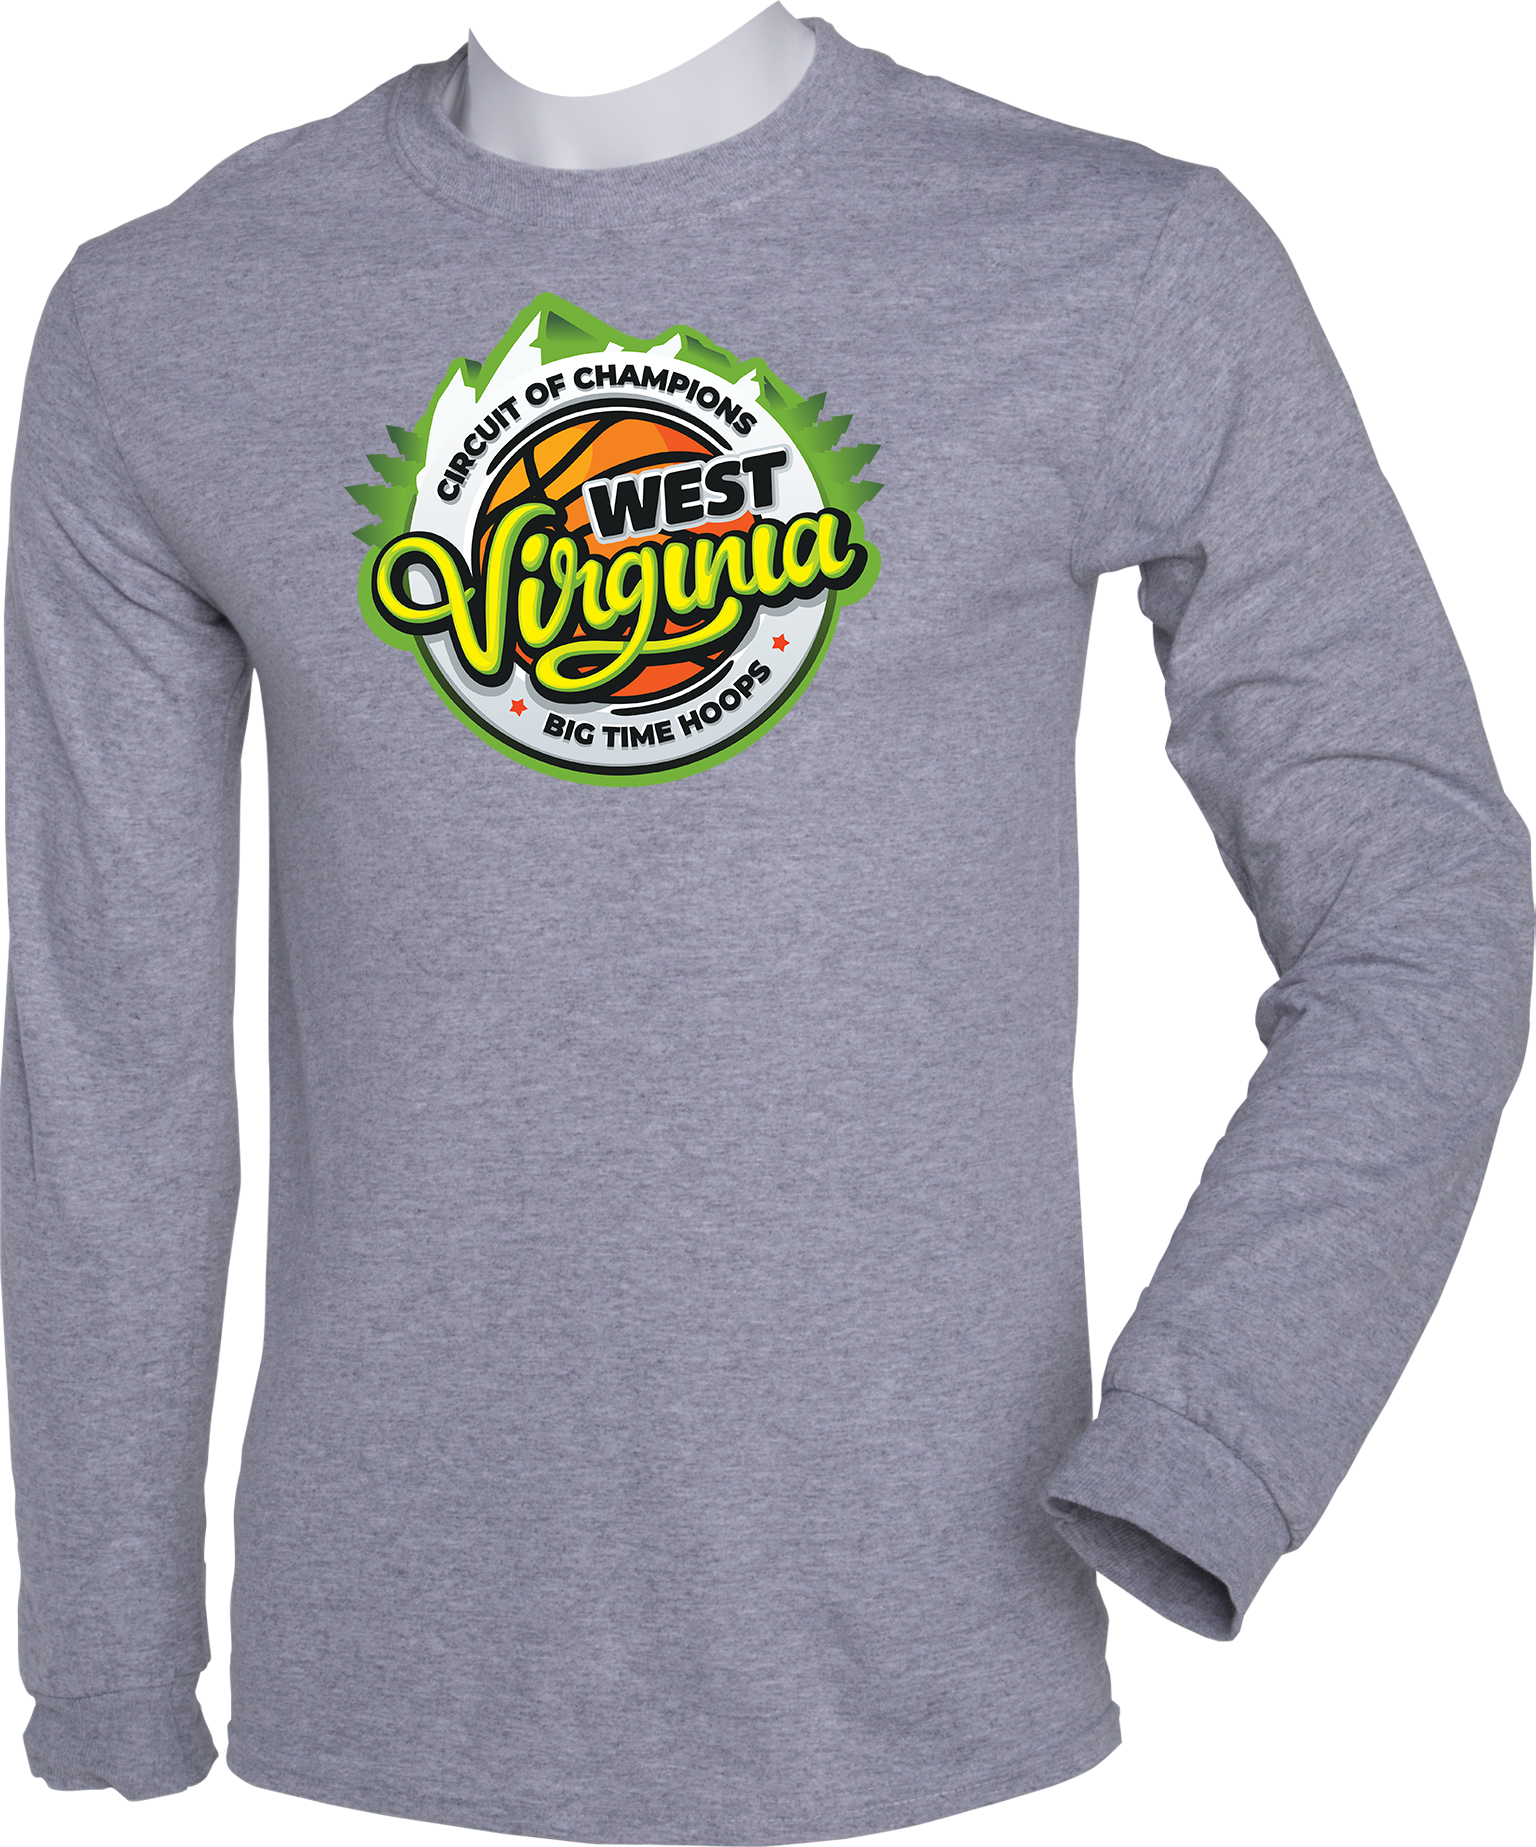 PERFORMANCE SHIRTS - 2023 Circuit of Champions WEST VIRGINIA